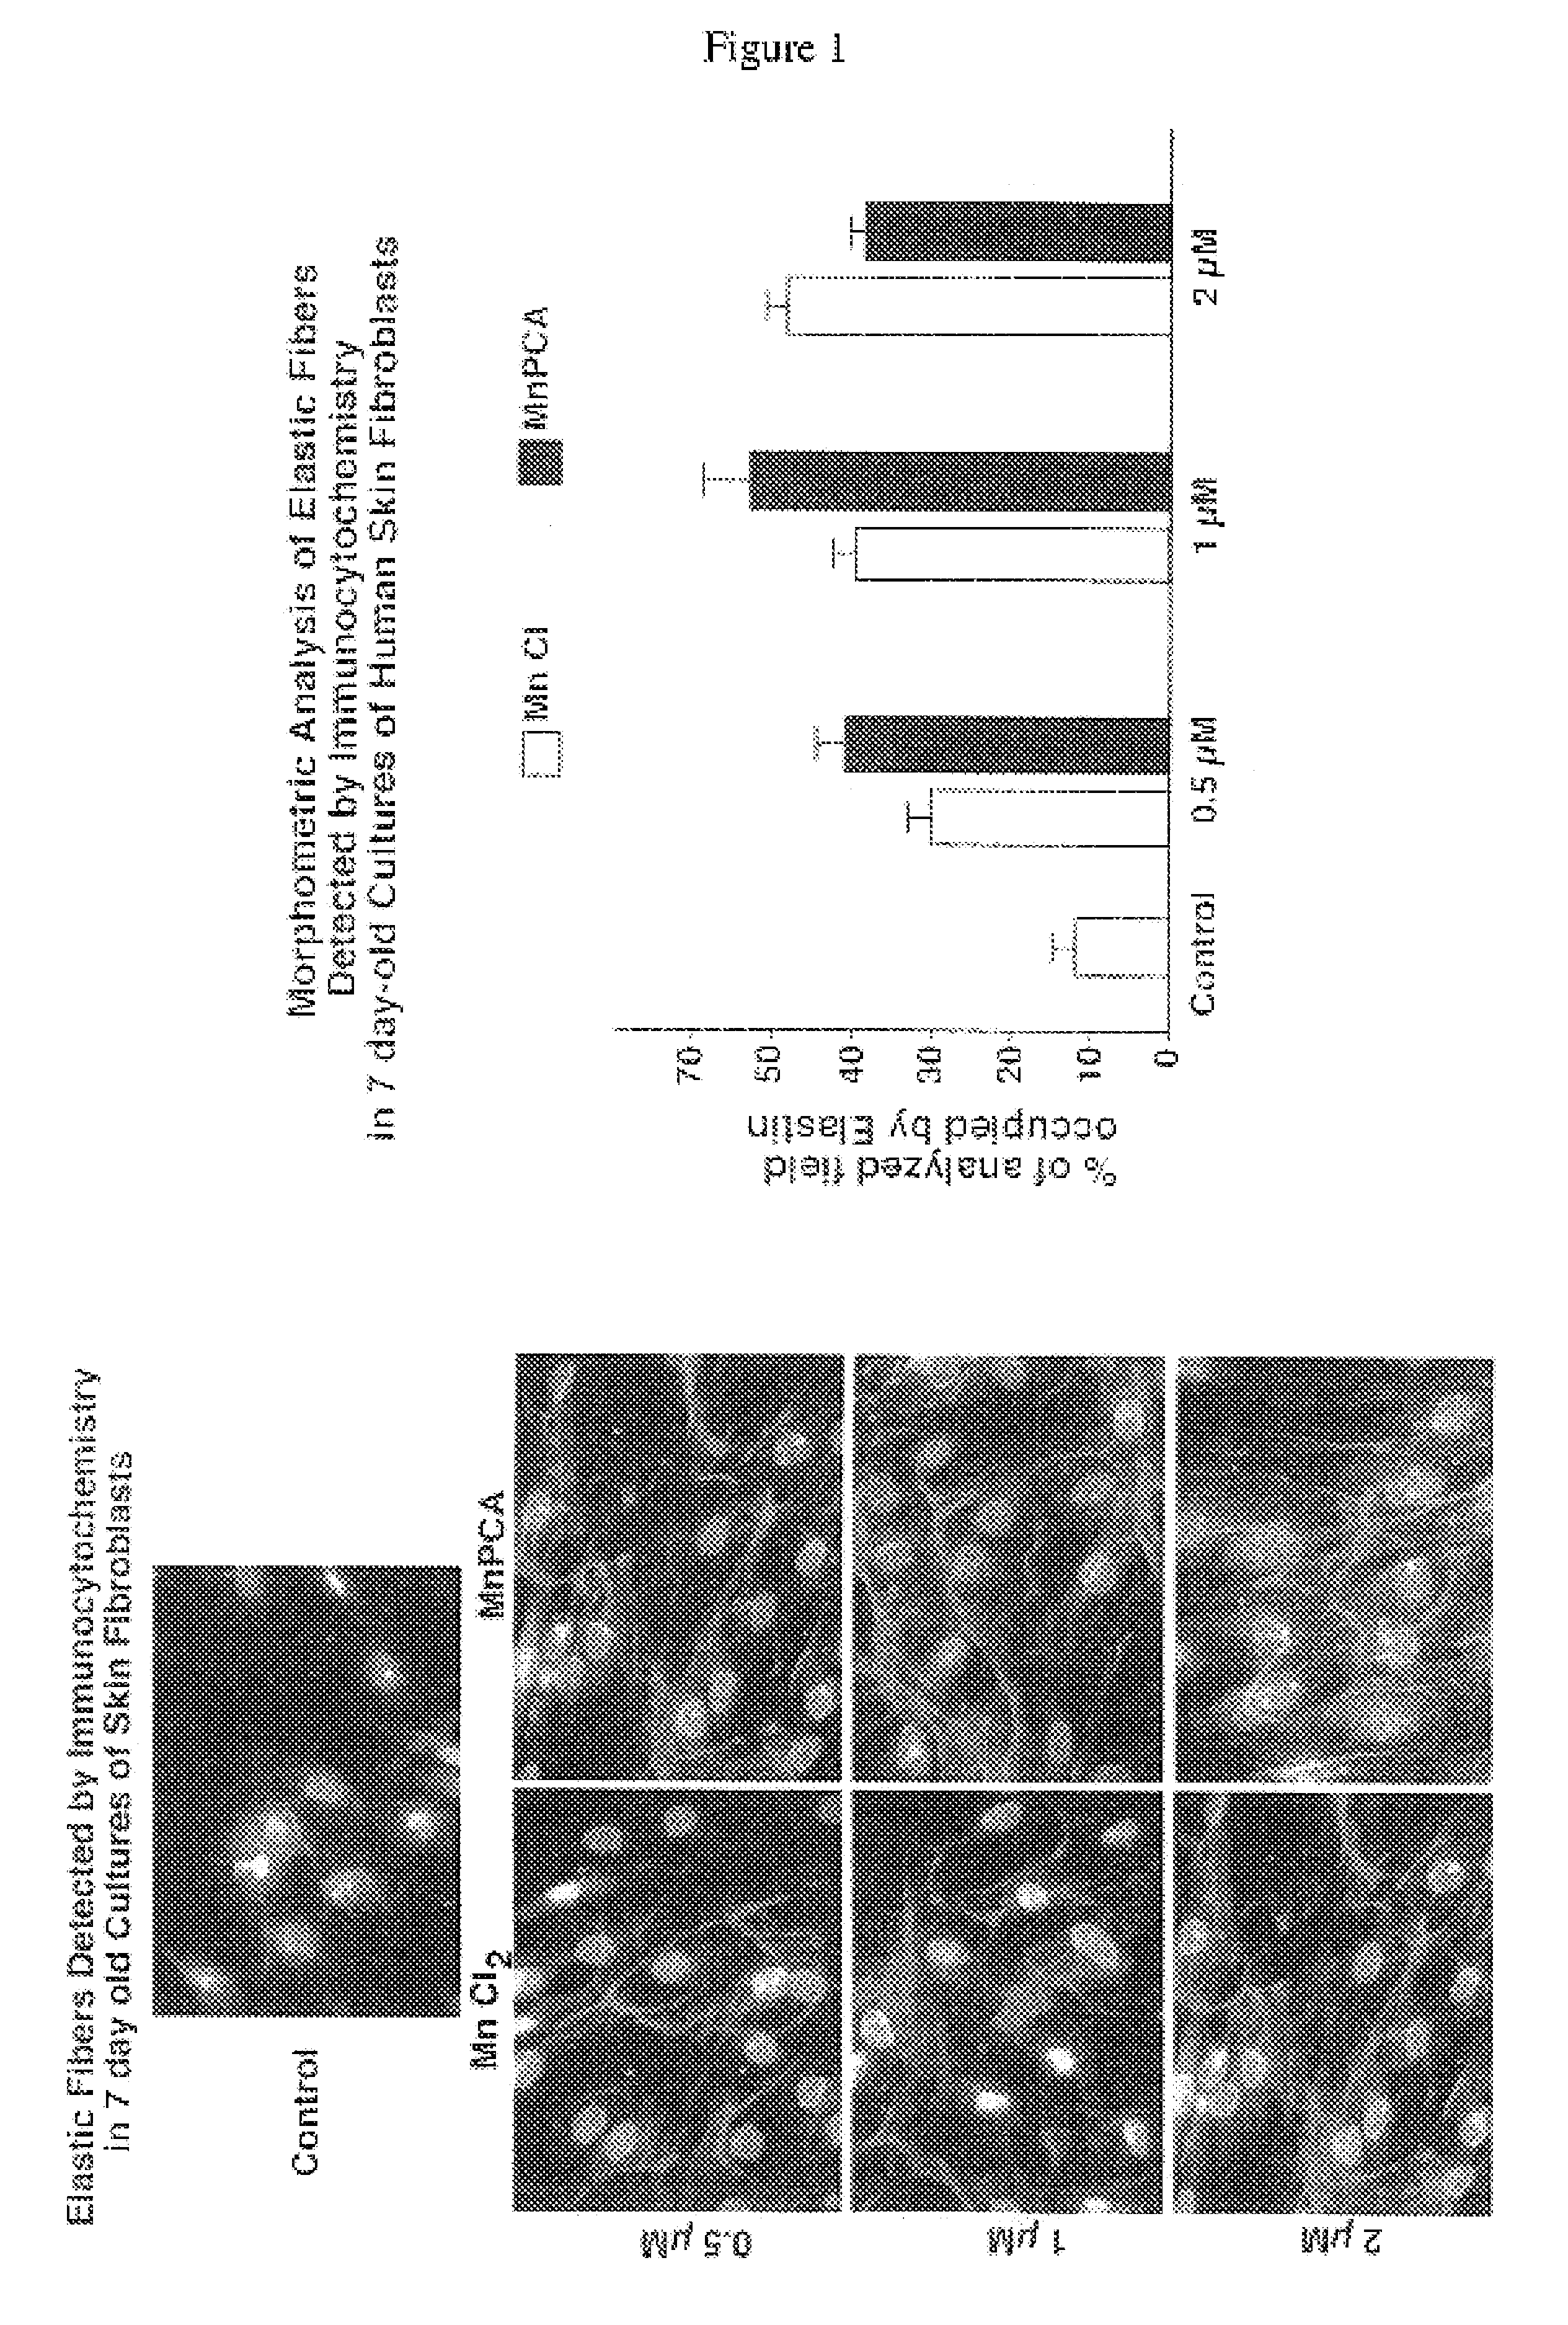 Compositions for elastogenesis and connective tissue treatment